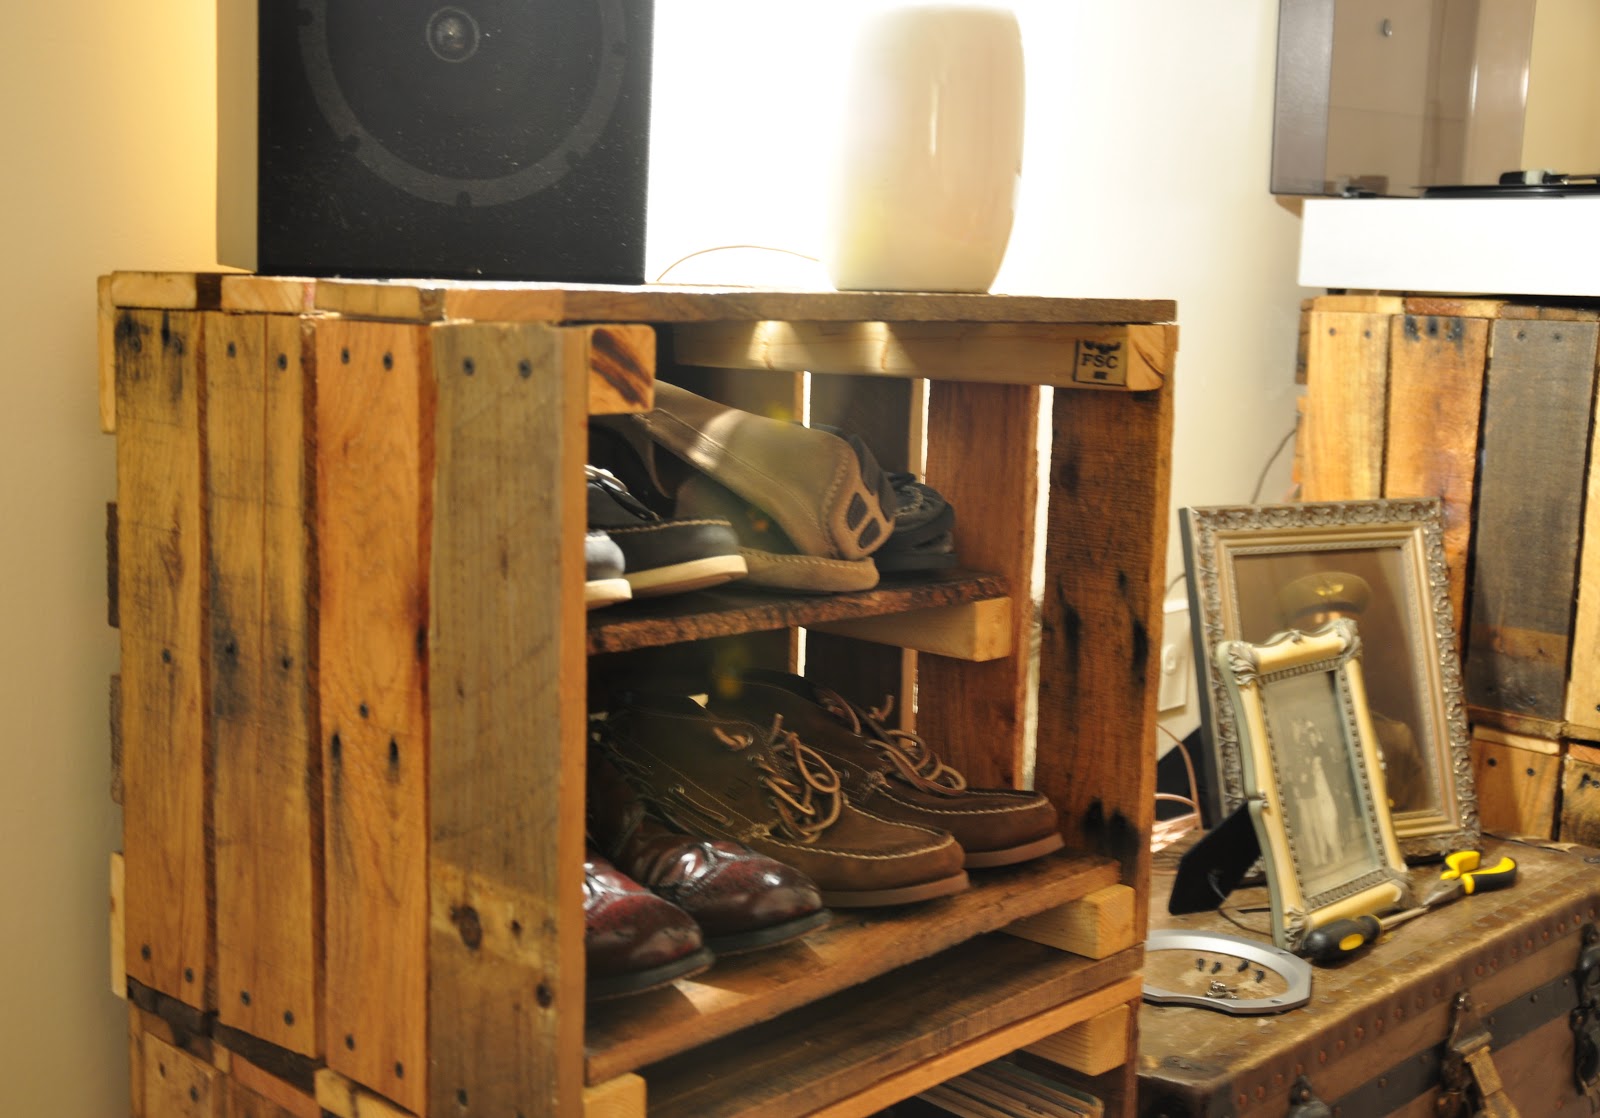 Upcycling Creations - Turning Trash Into Treasure : From Shipping Pallets to Record Crates